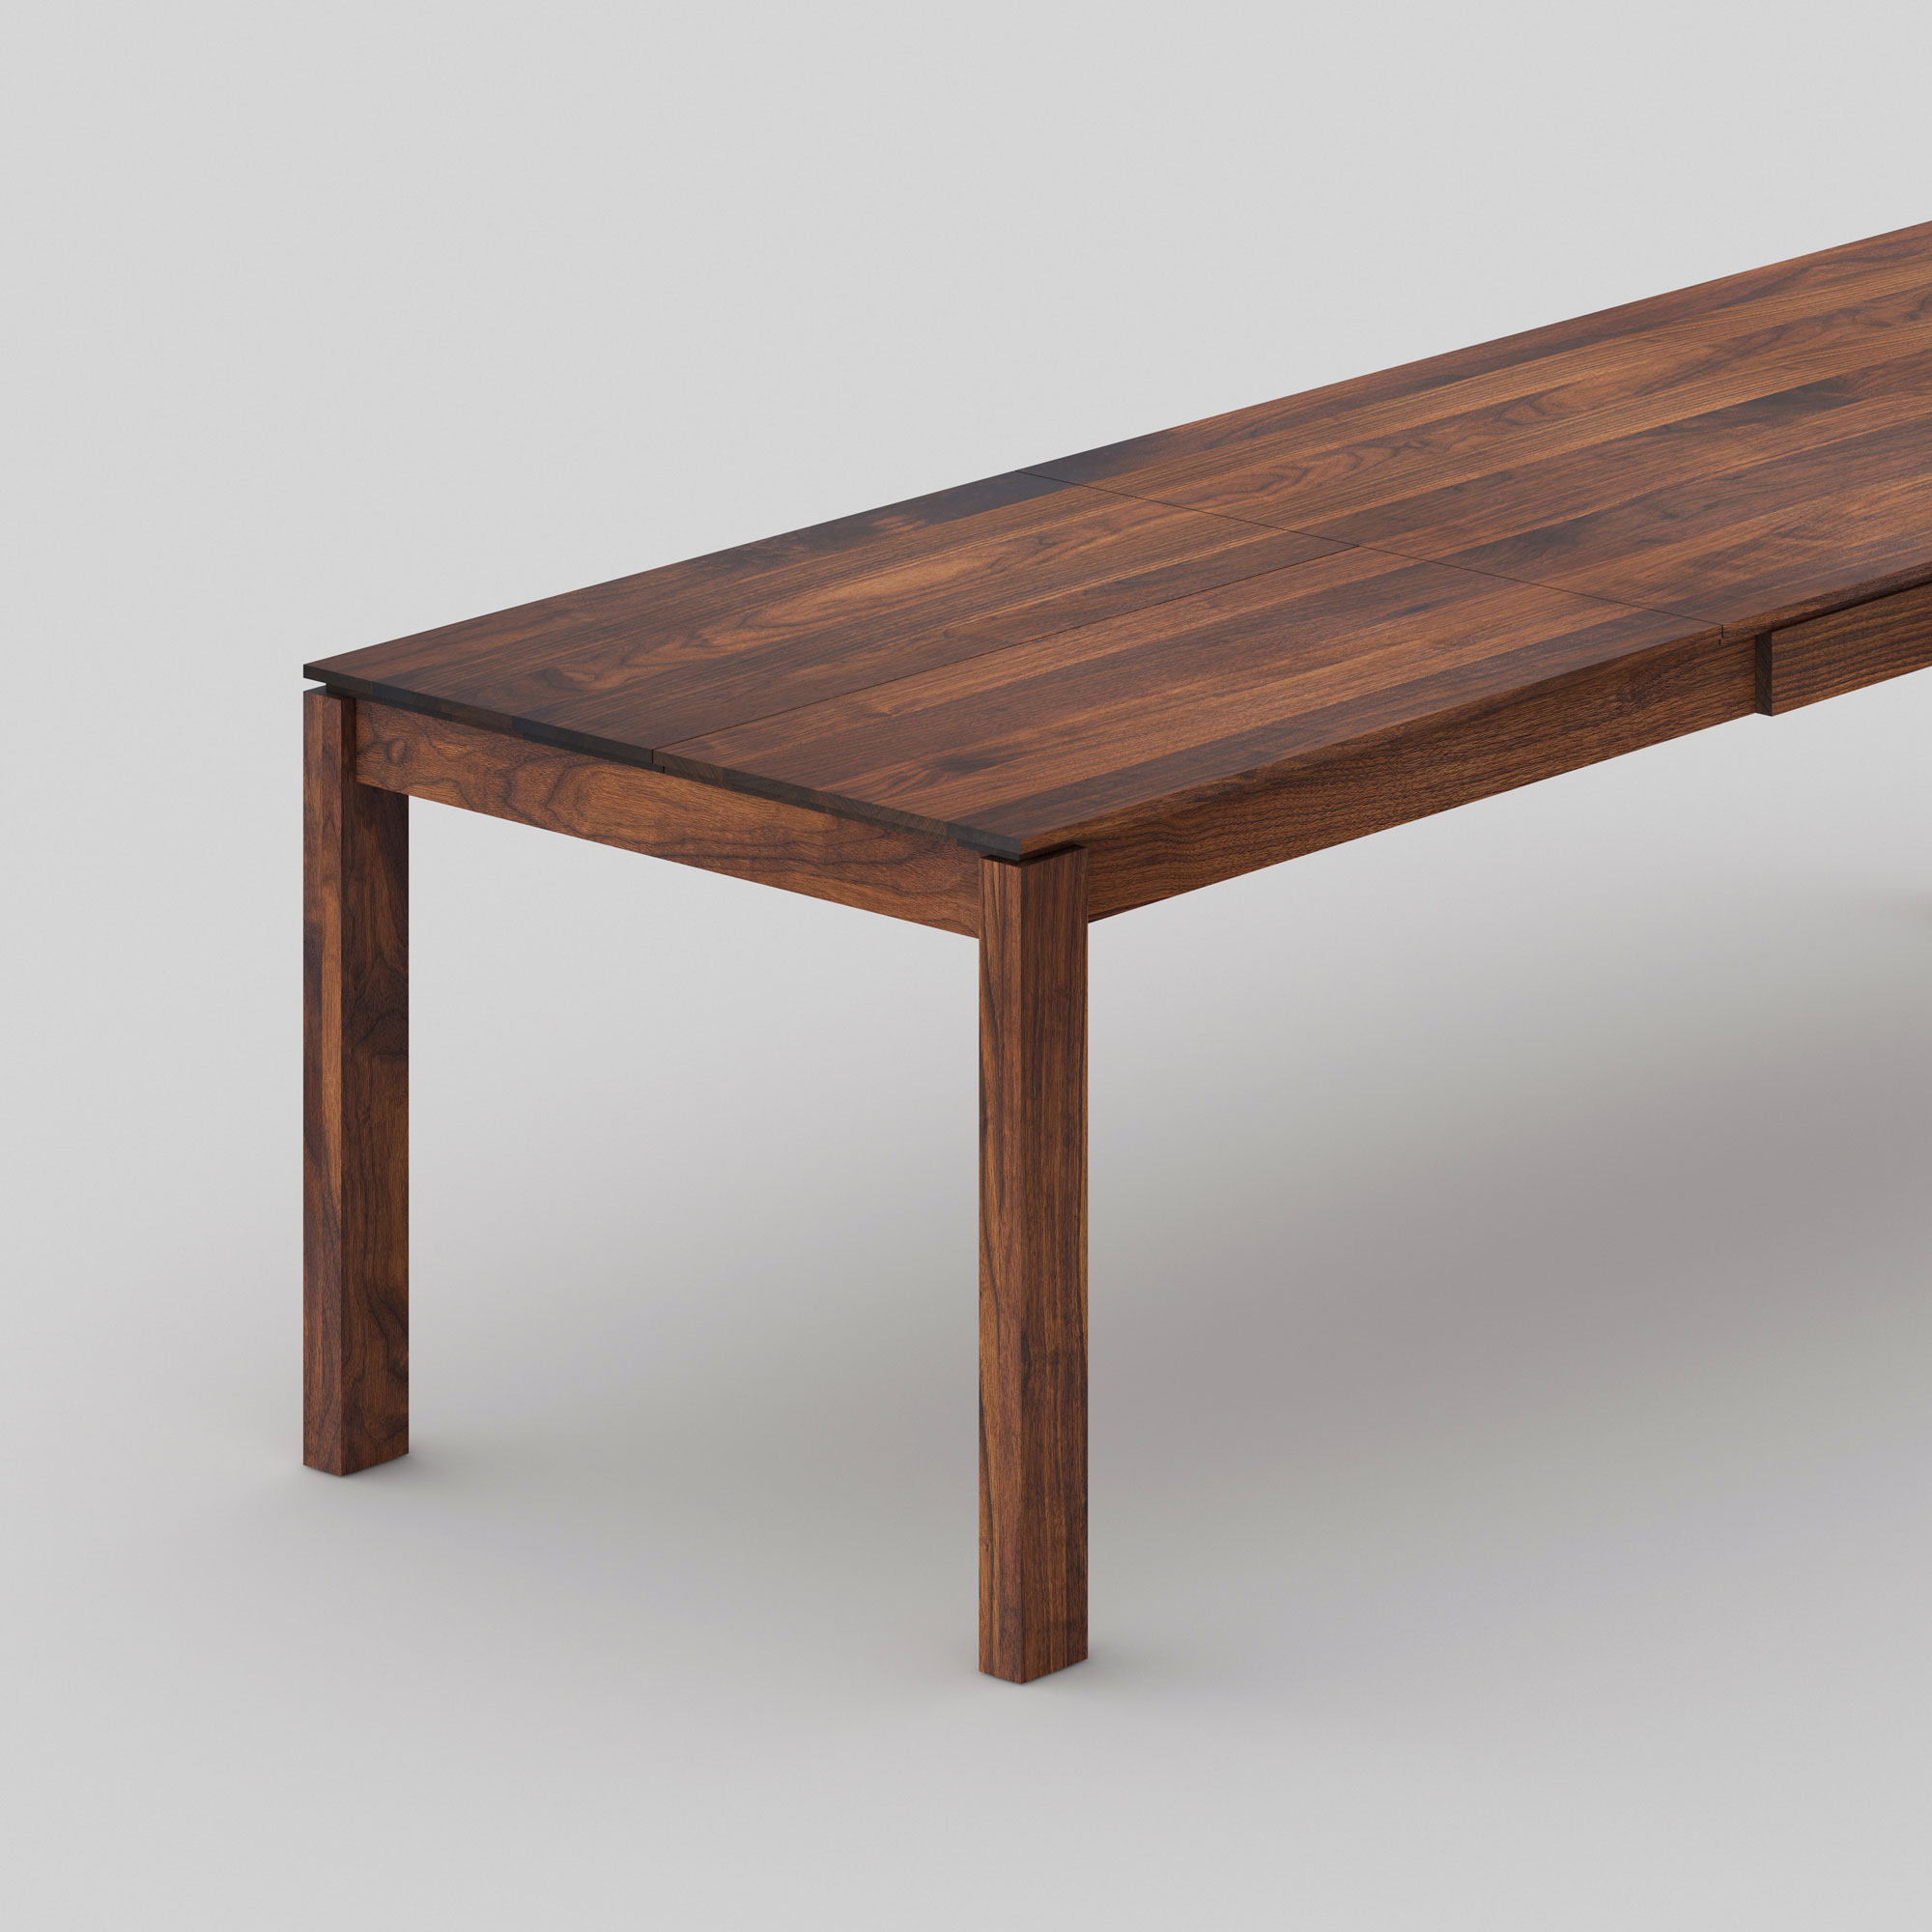 Extending Dining Table CONVERTO BUTTERFLY cam2 custom made in solid wood by vitamin design